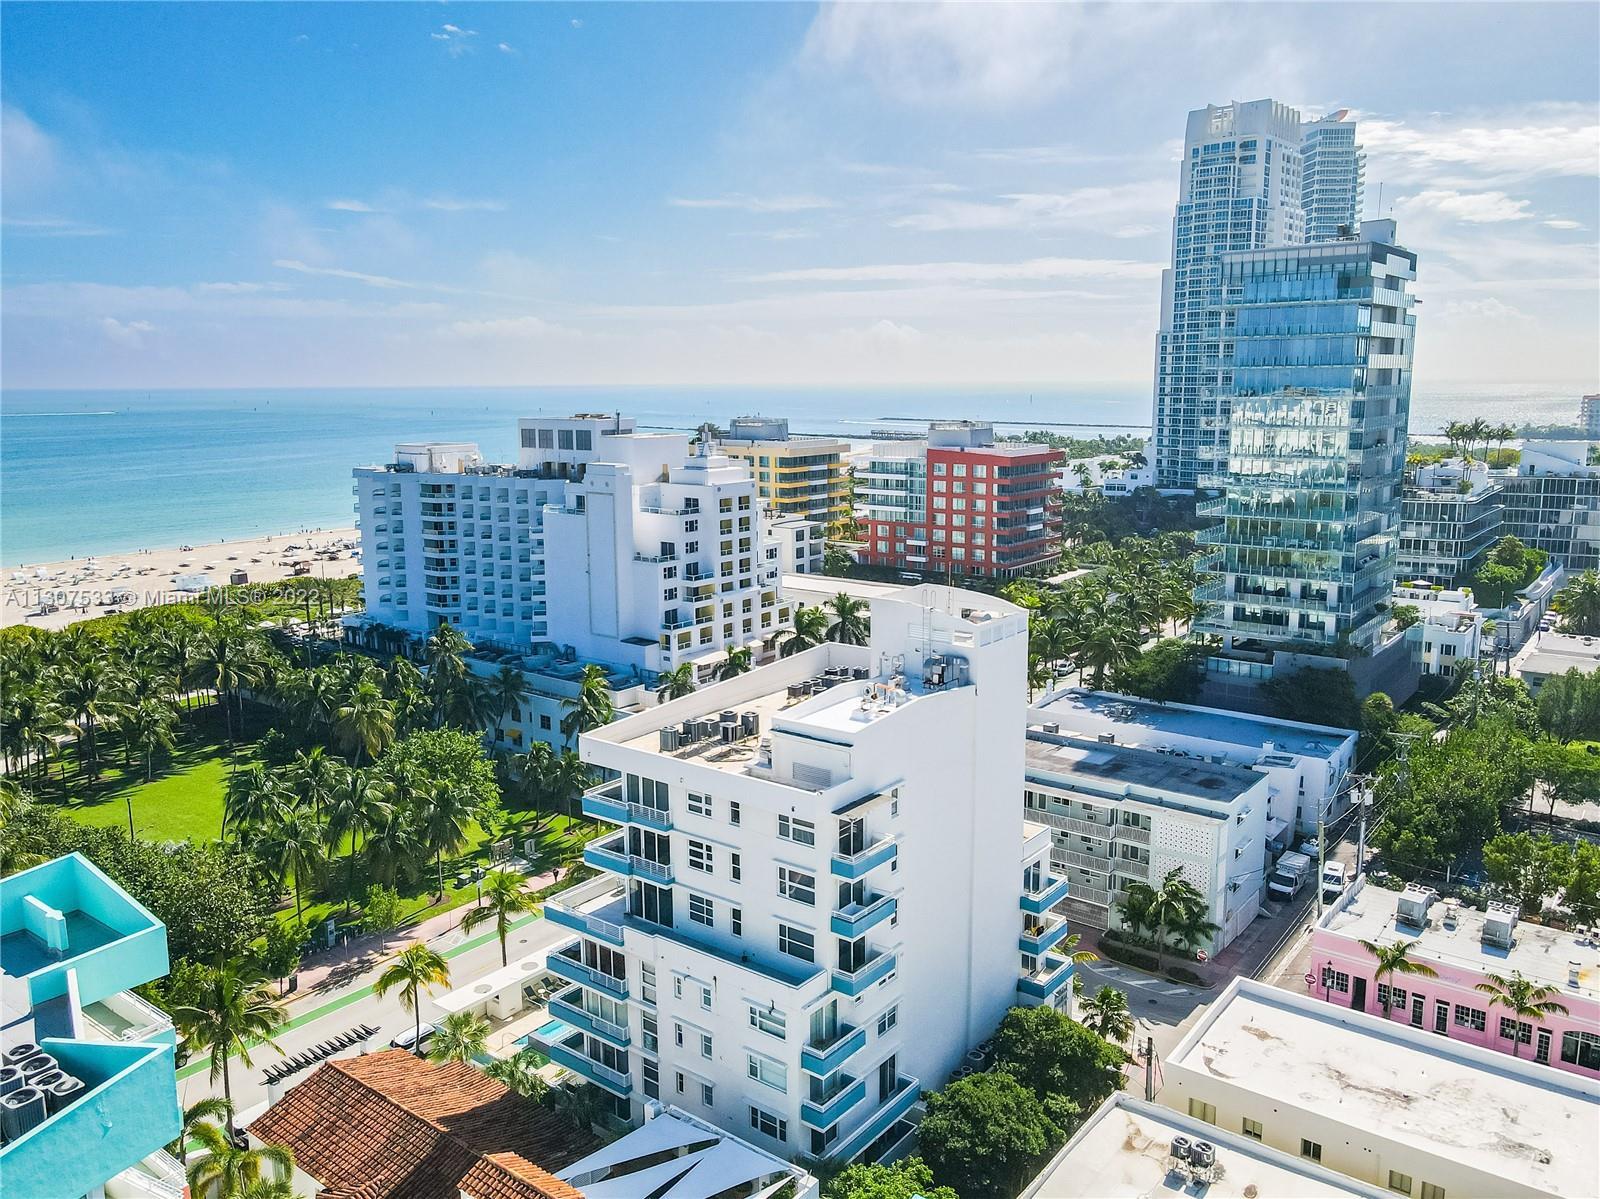 Welcome to 200 Ocean Dr. #6B. This spacious studio offers stunning direct ocean views through Dougla